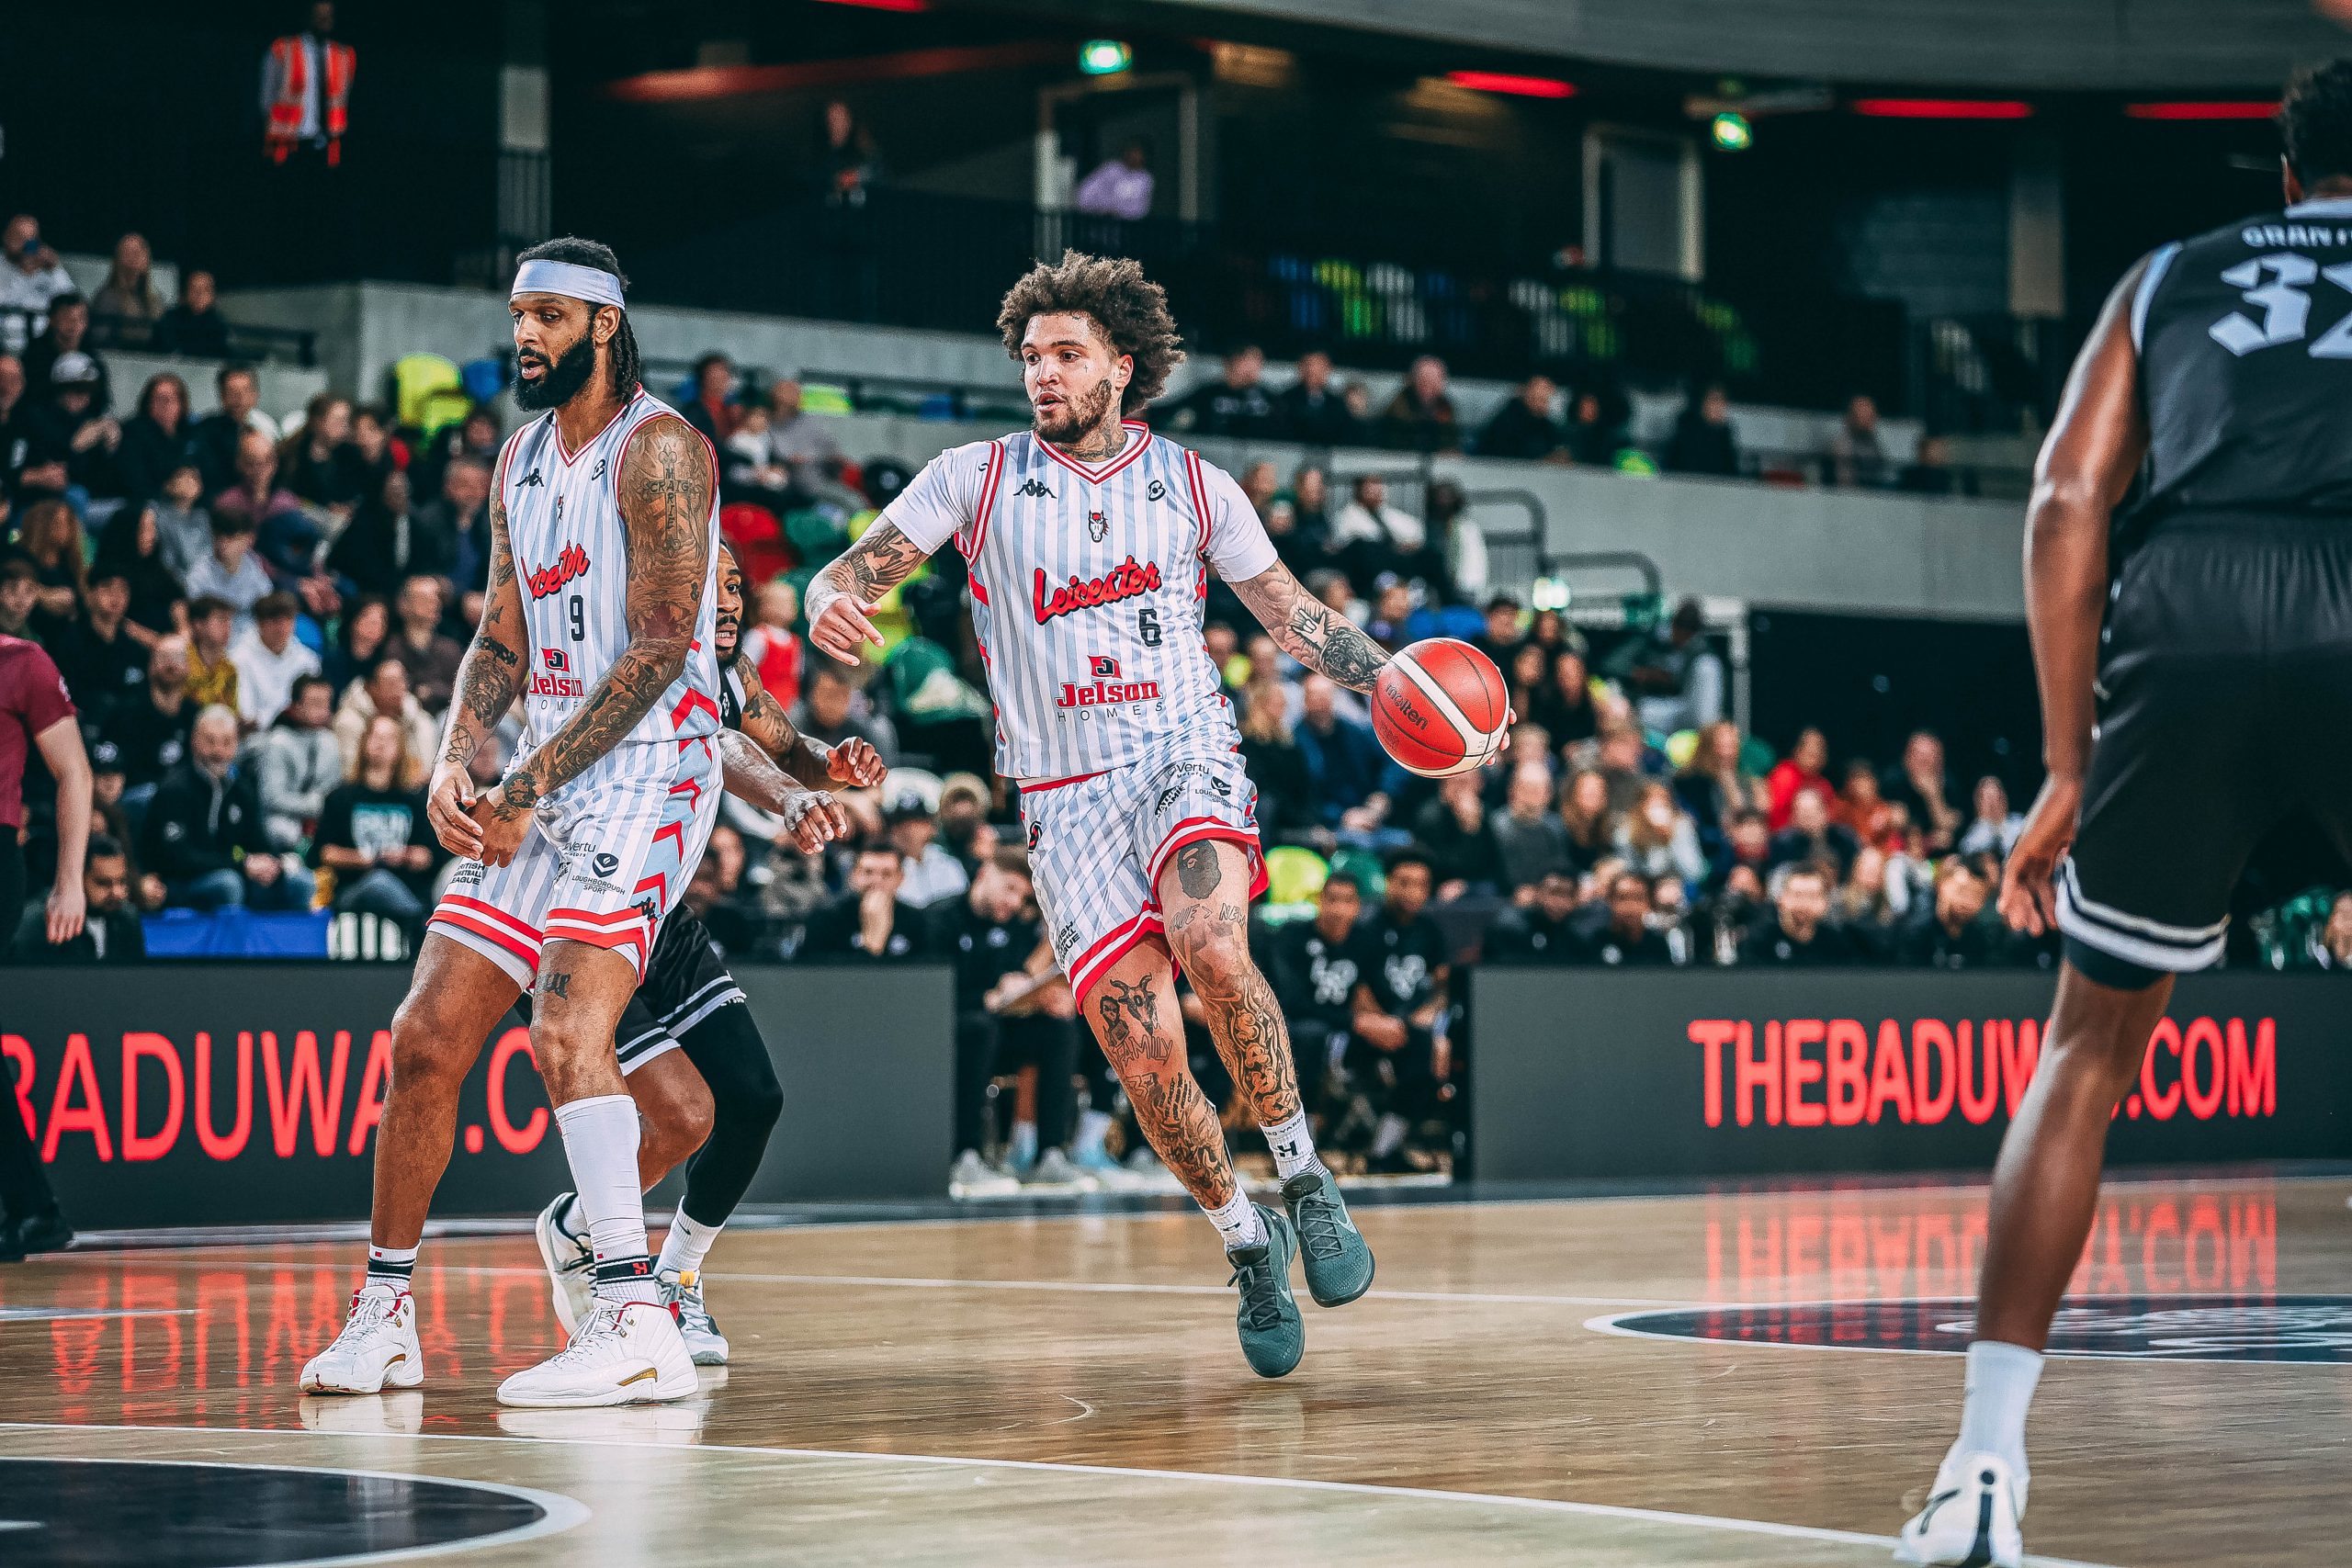 Teddy Allen named in British Basketball League Team of the Week